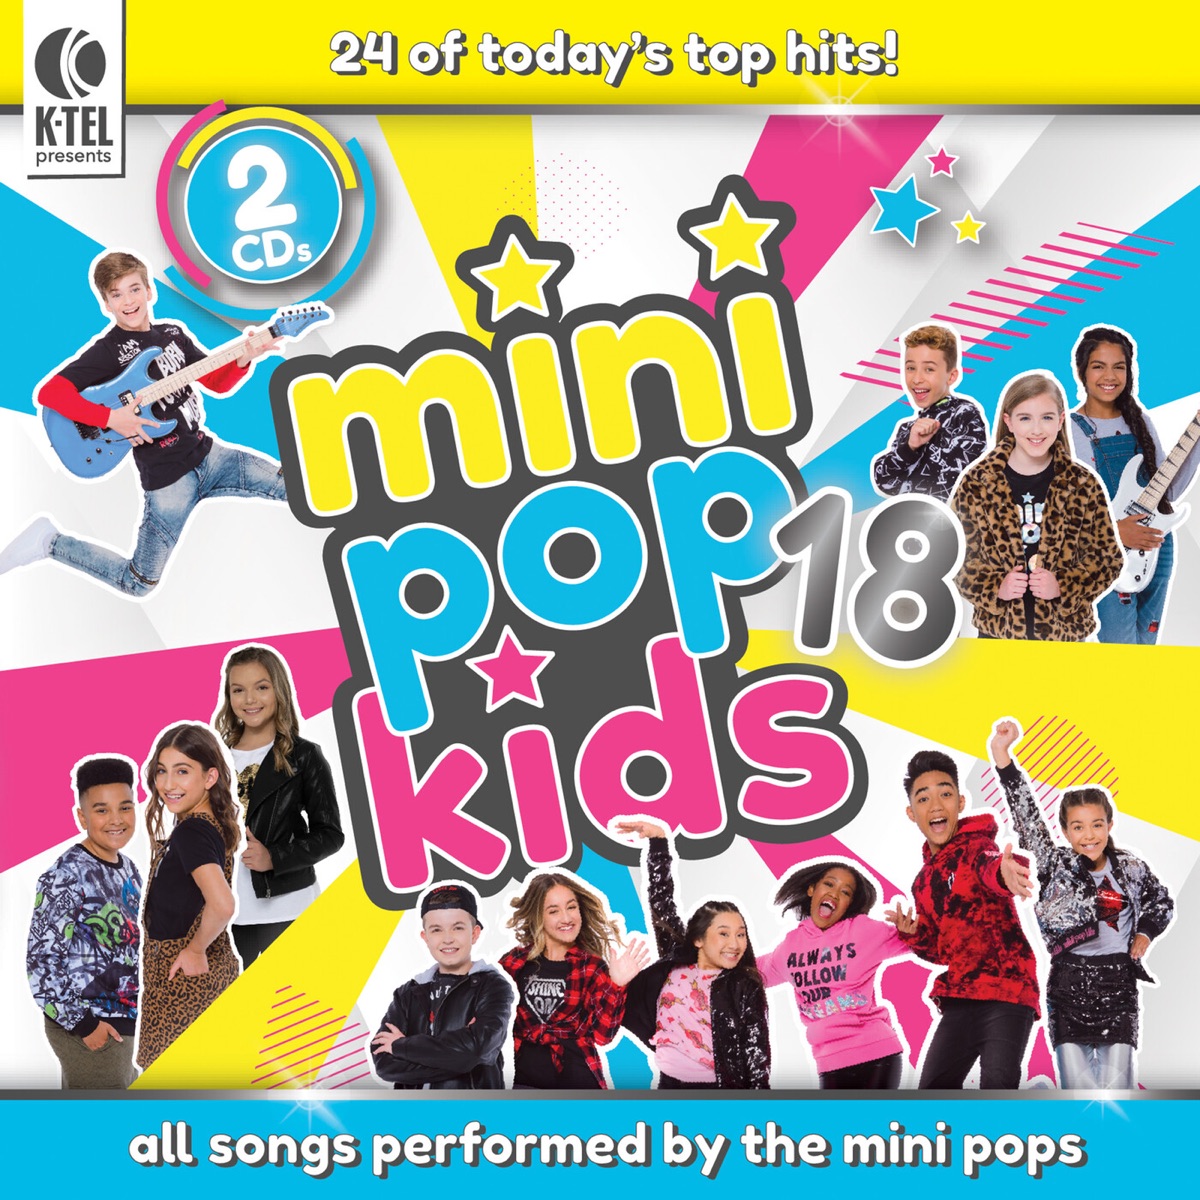 Mini Pop Kids will perform family-friendly covers of hit pop tunes